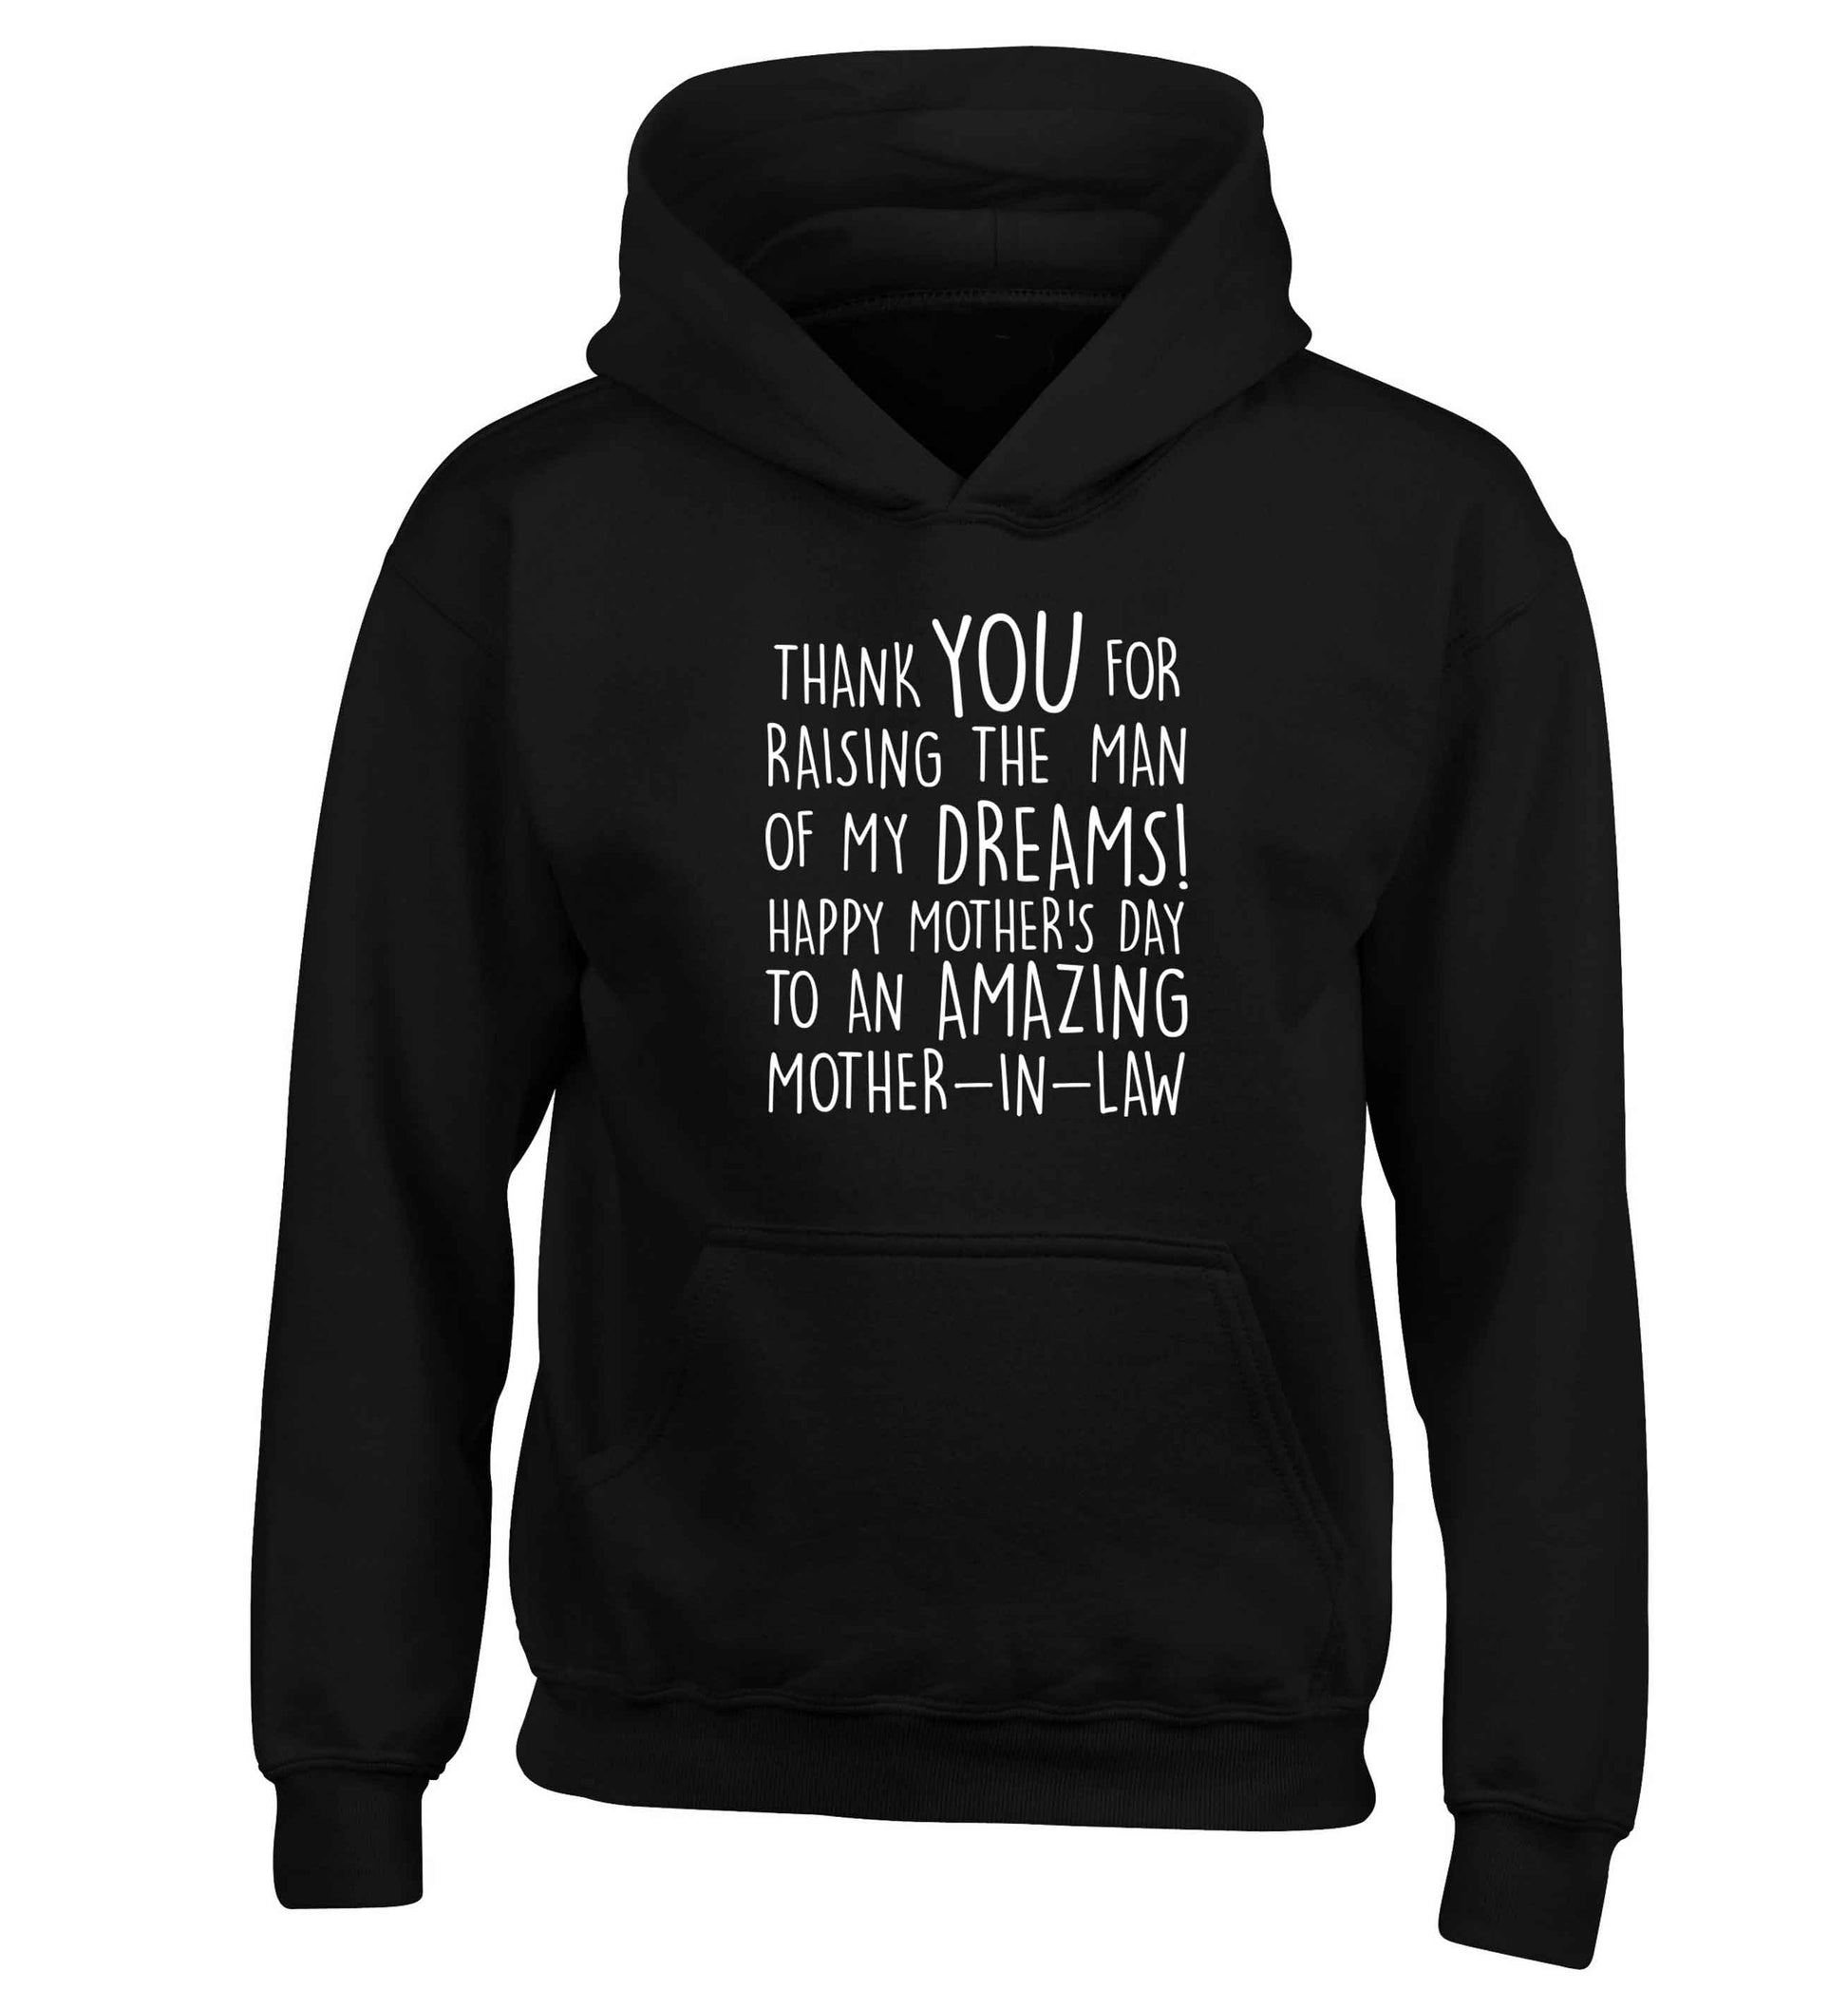 Raising the man of my dreams mother's day mother-in-law children's black hoodie 12-13 Years